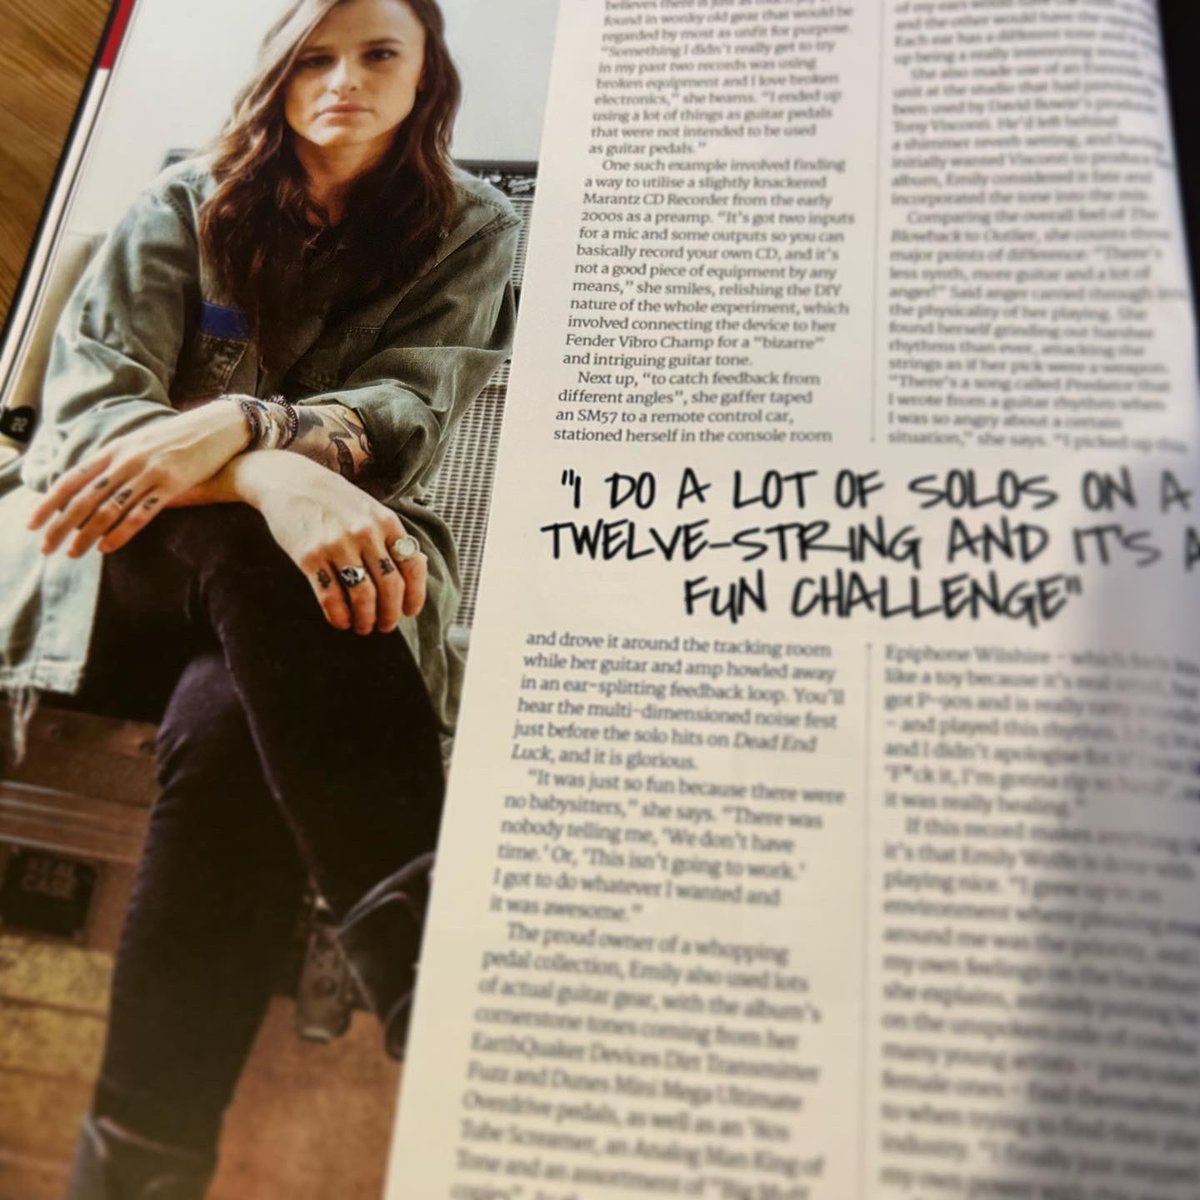 Had a wicked time chatting with all these brilliant people for the latest issue of @TotalGuitar, which is out now! 🎸📖 Big thank yous to @TroyRed7 @EmilyWolfeMusic, @hawxxmusic, @jongomm, @Scott_Holiday & @WolfVanHalen for dialling in and nerding out 😎